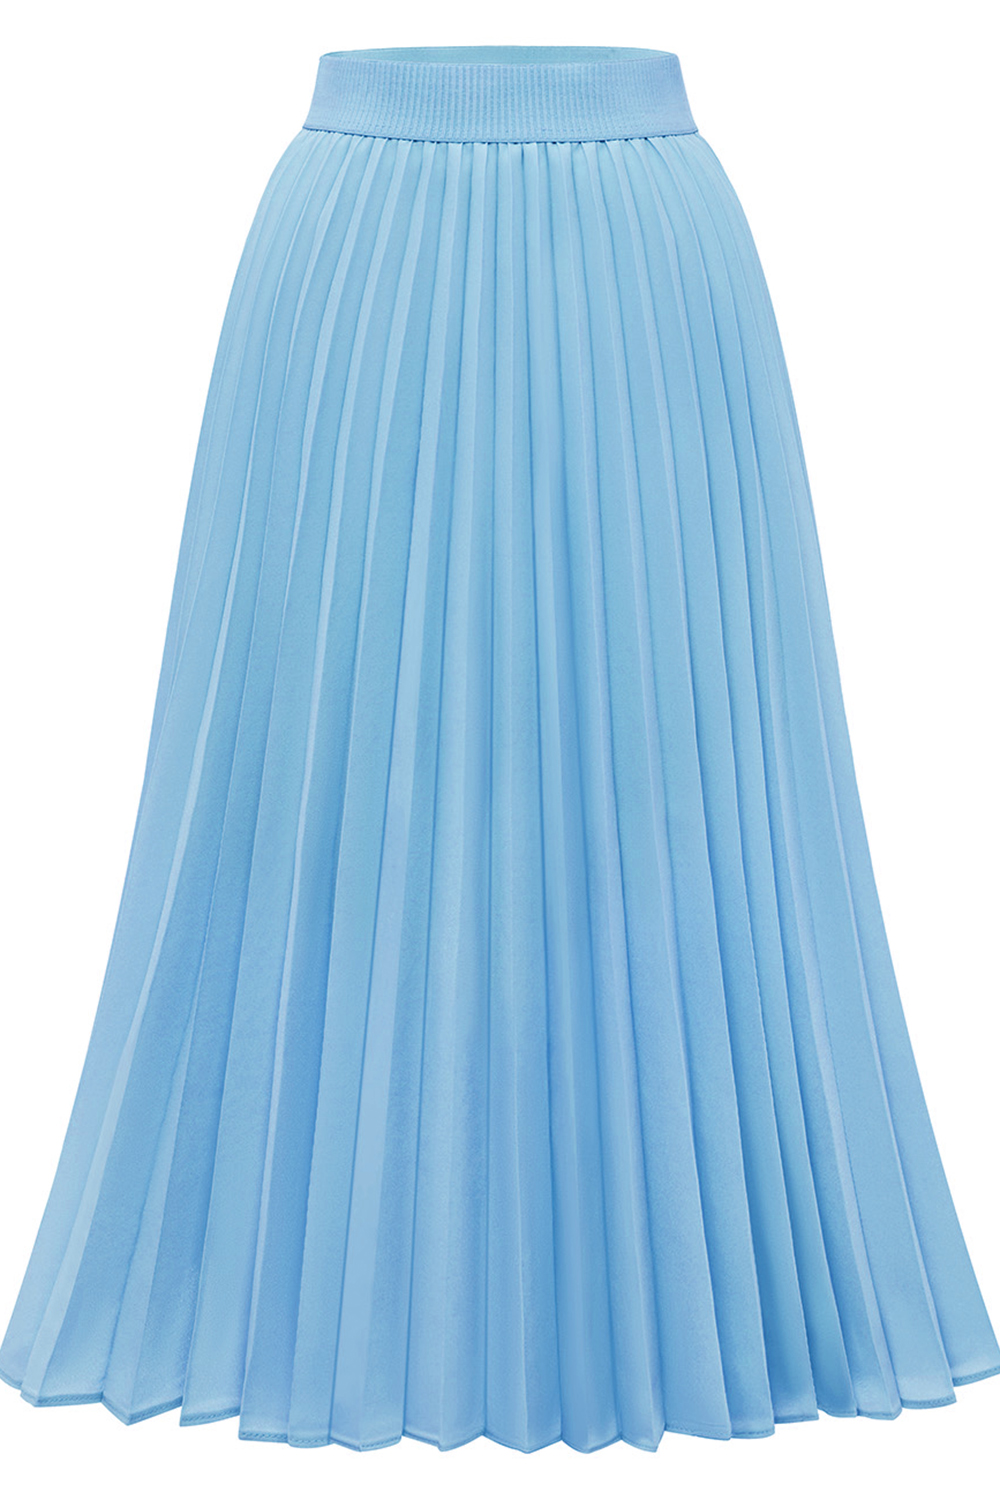 Blue Pleated Midi Skirts for Women, Long High Waisted Chiffon Flare Casual Skirt 2024